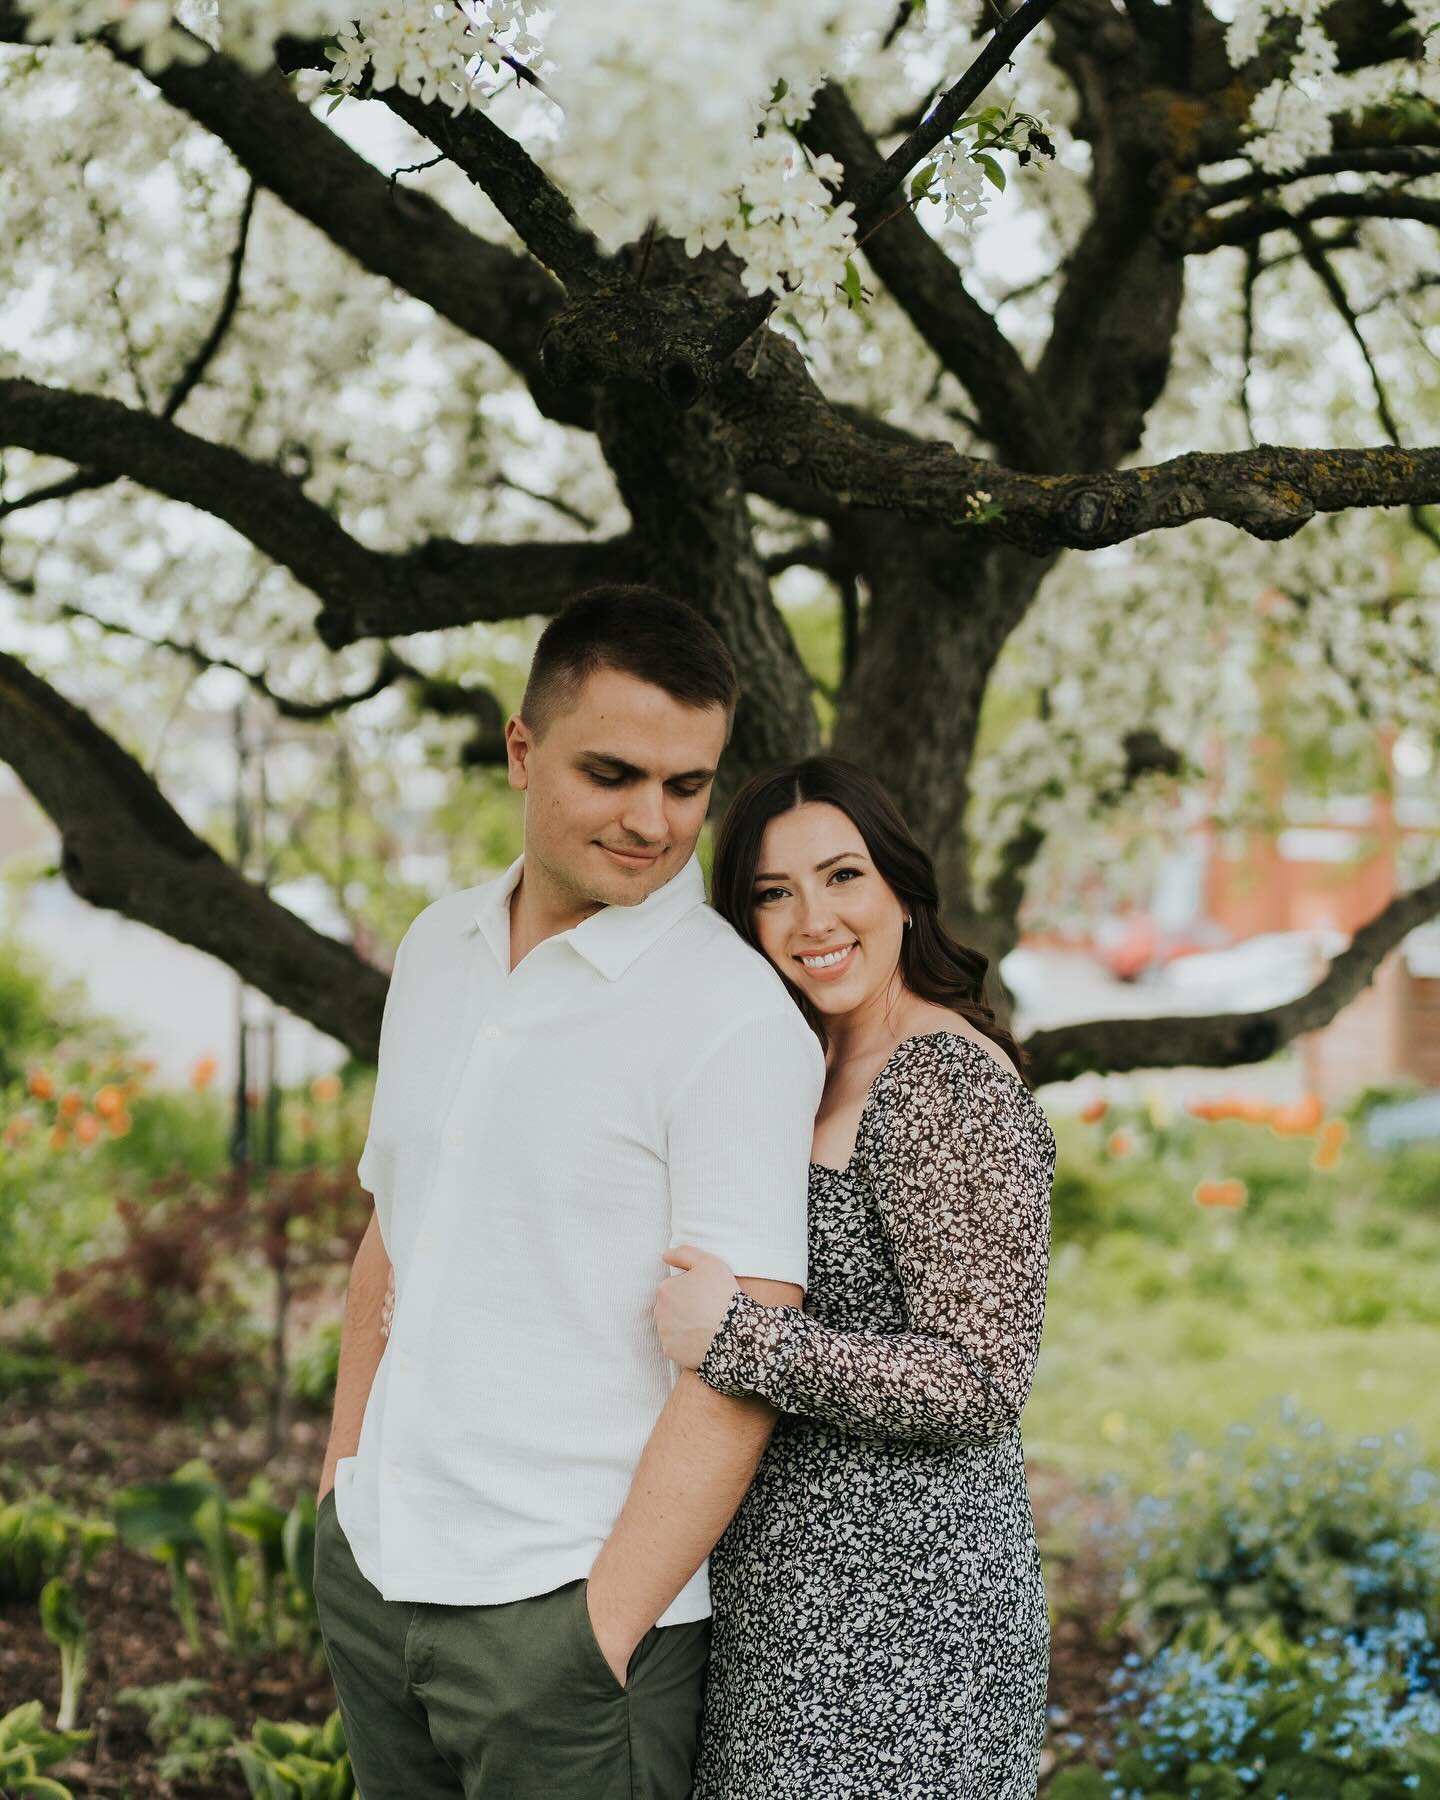 These two were an absolute breeze to photograph and we ended up with the cutest spring engagement session ever🌸